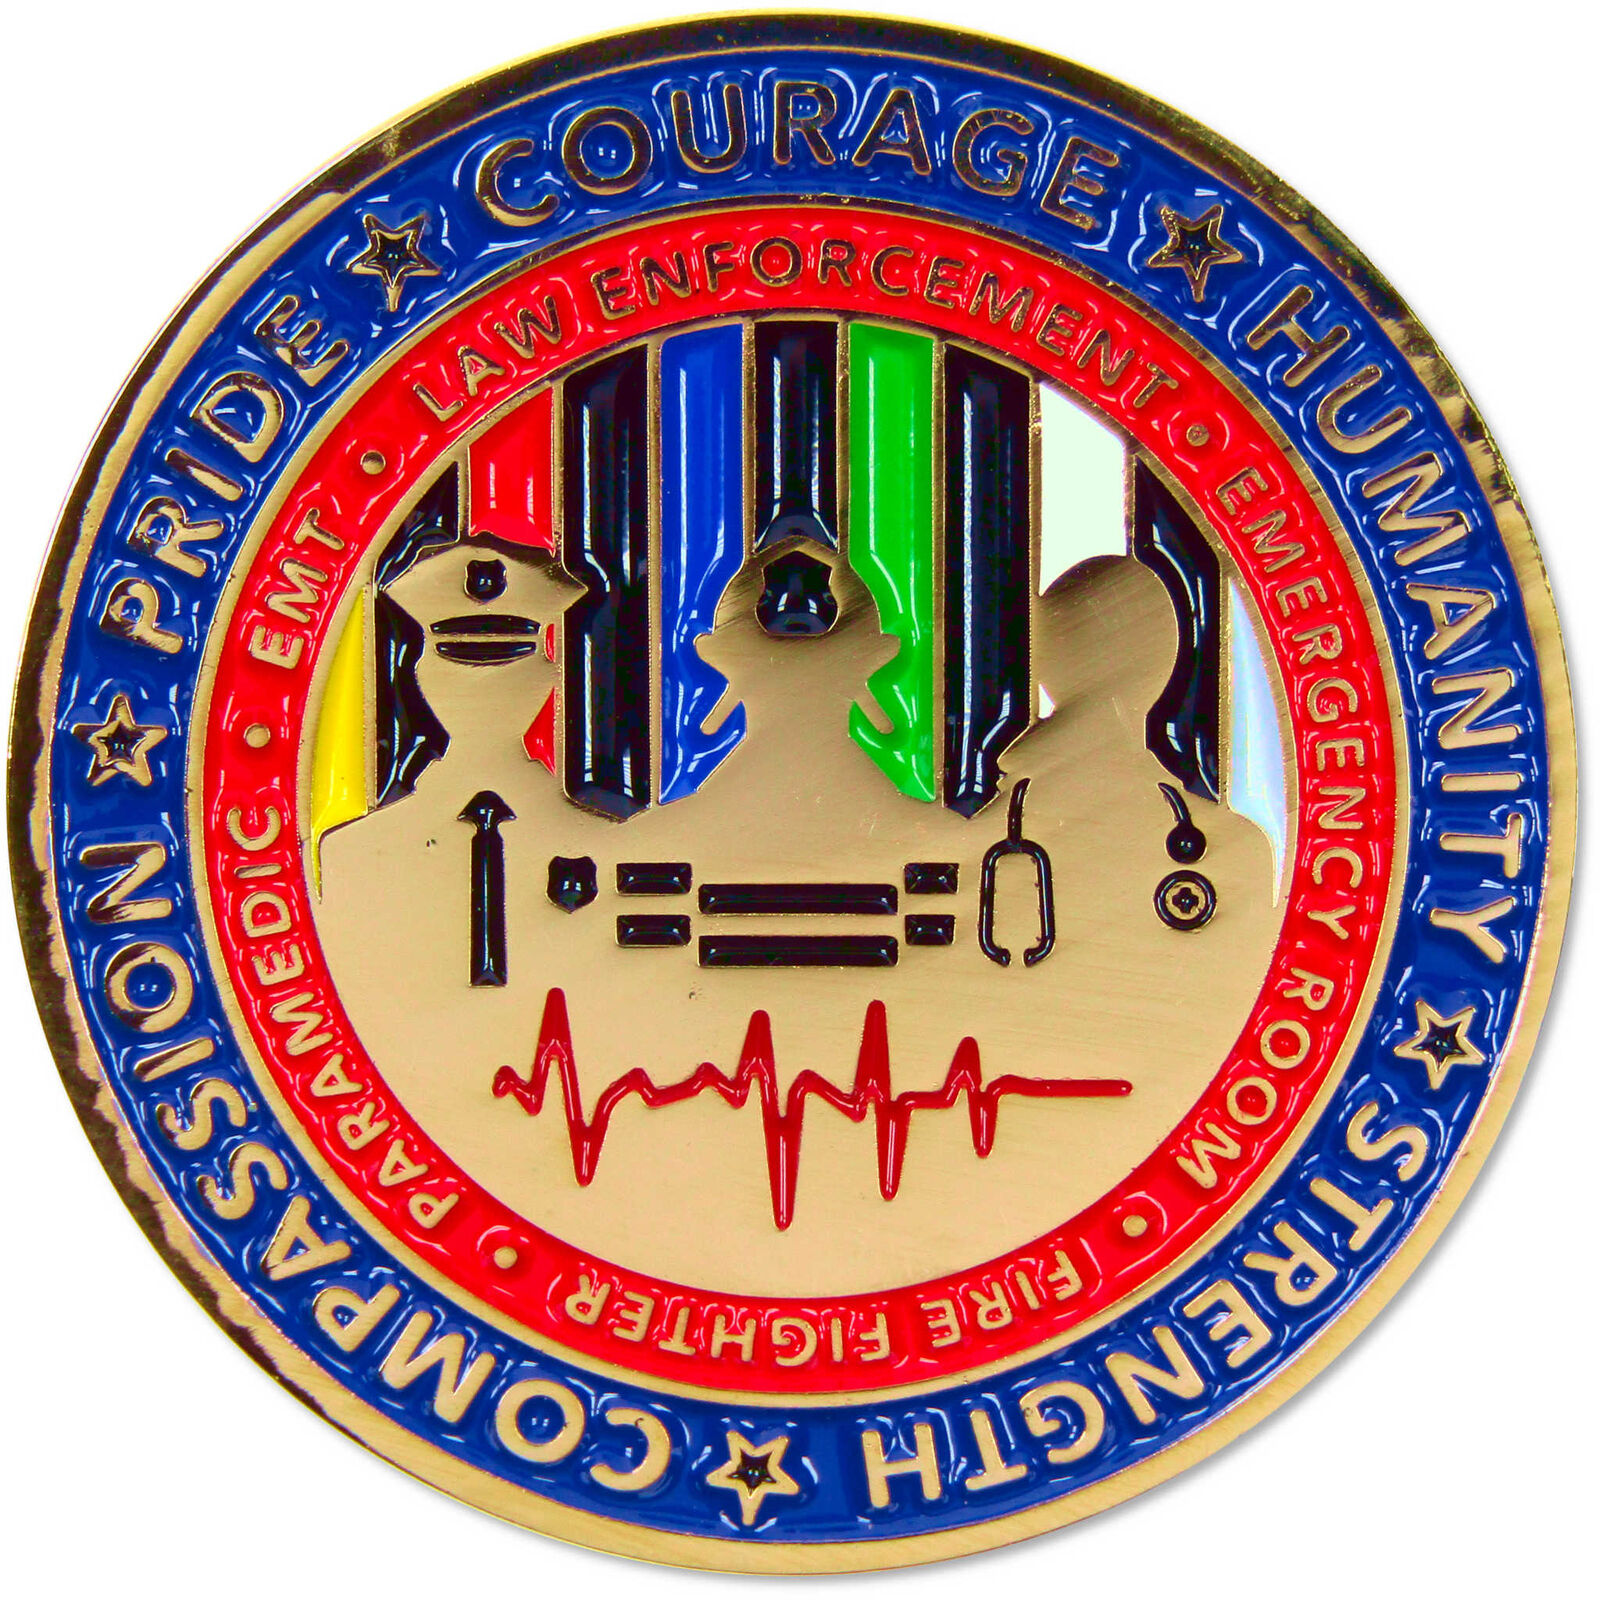 First Responder Challenge Coin Brass Collectible with Enameled Coloring